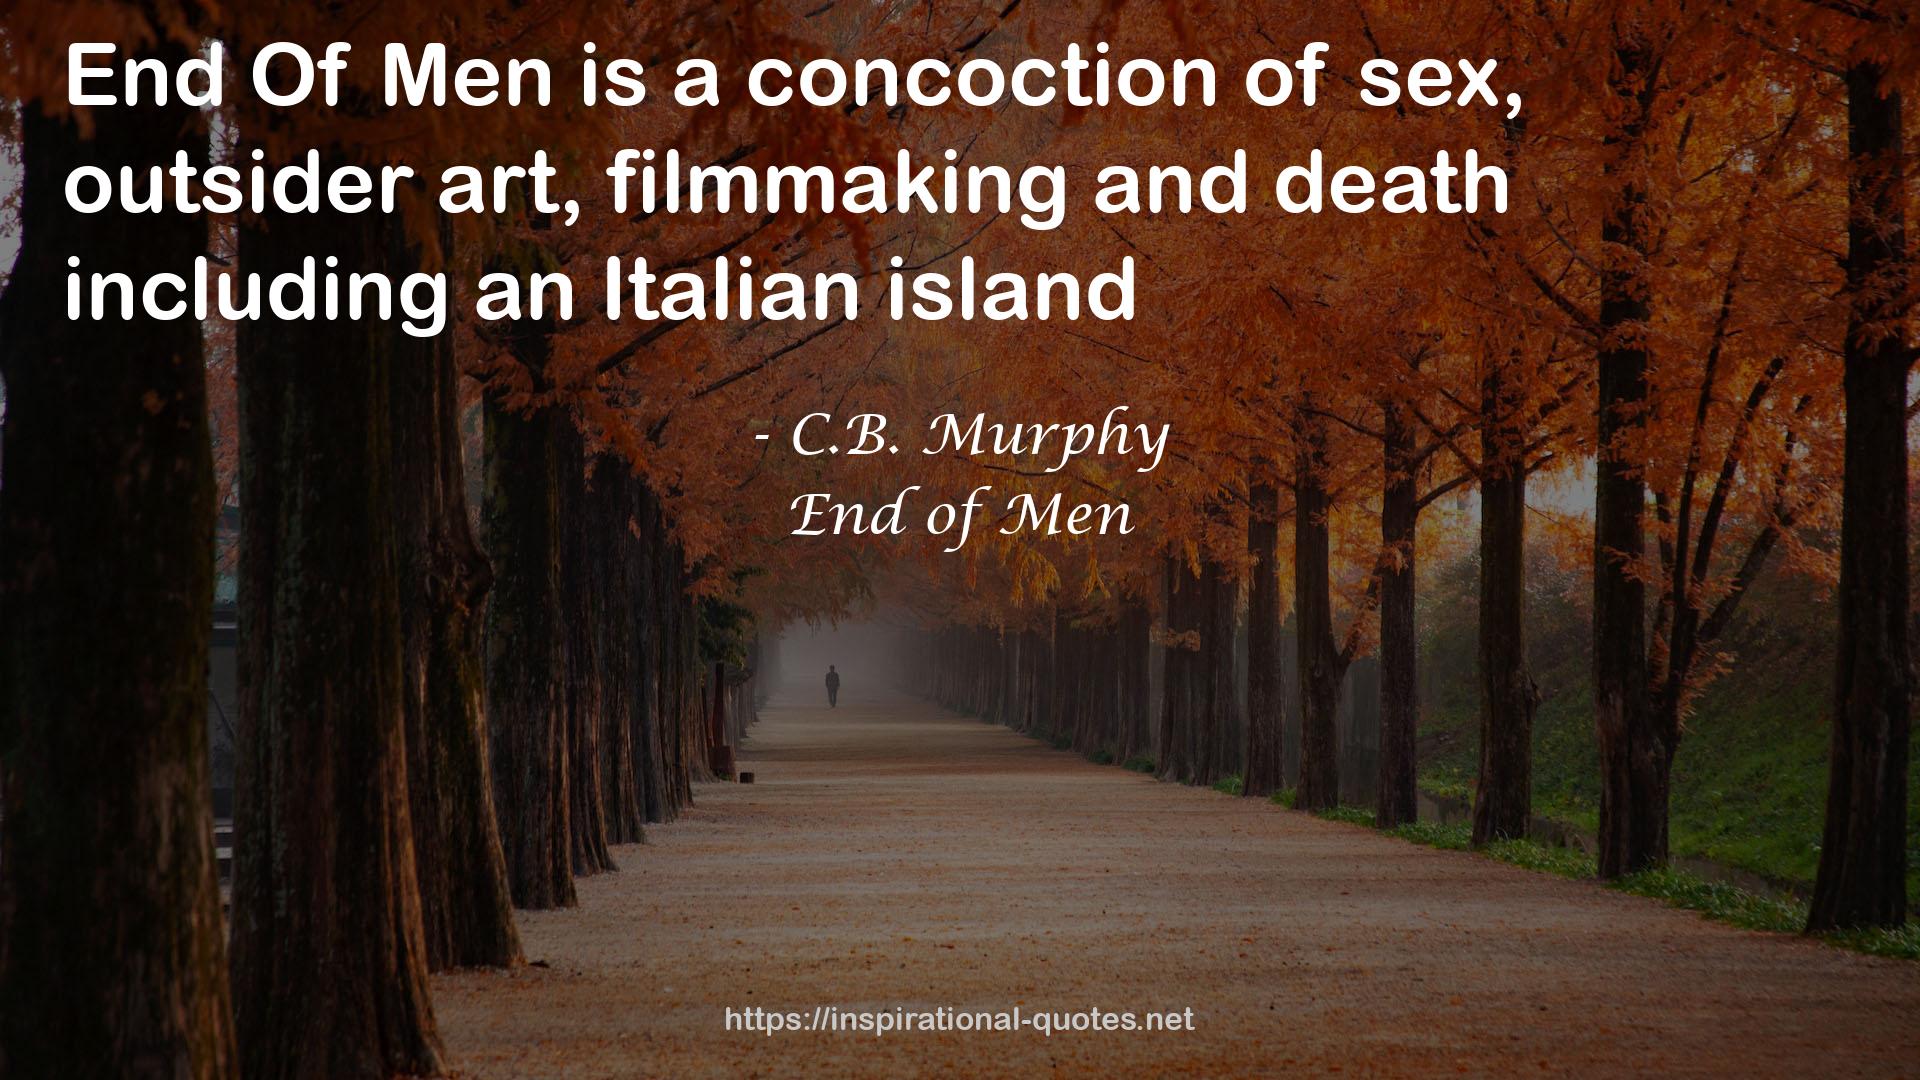 End of Men QUOTES